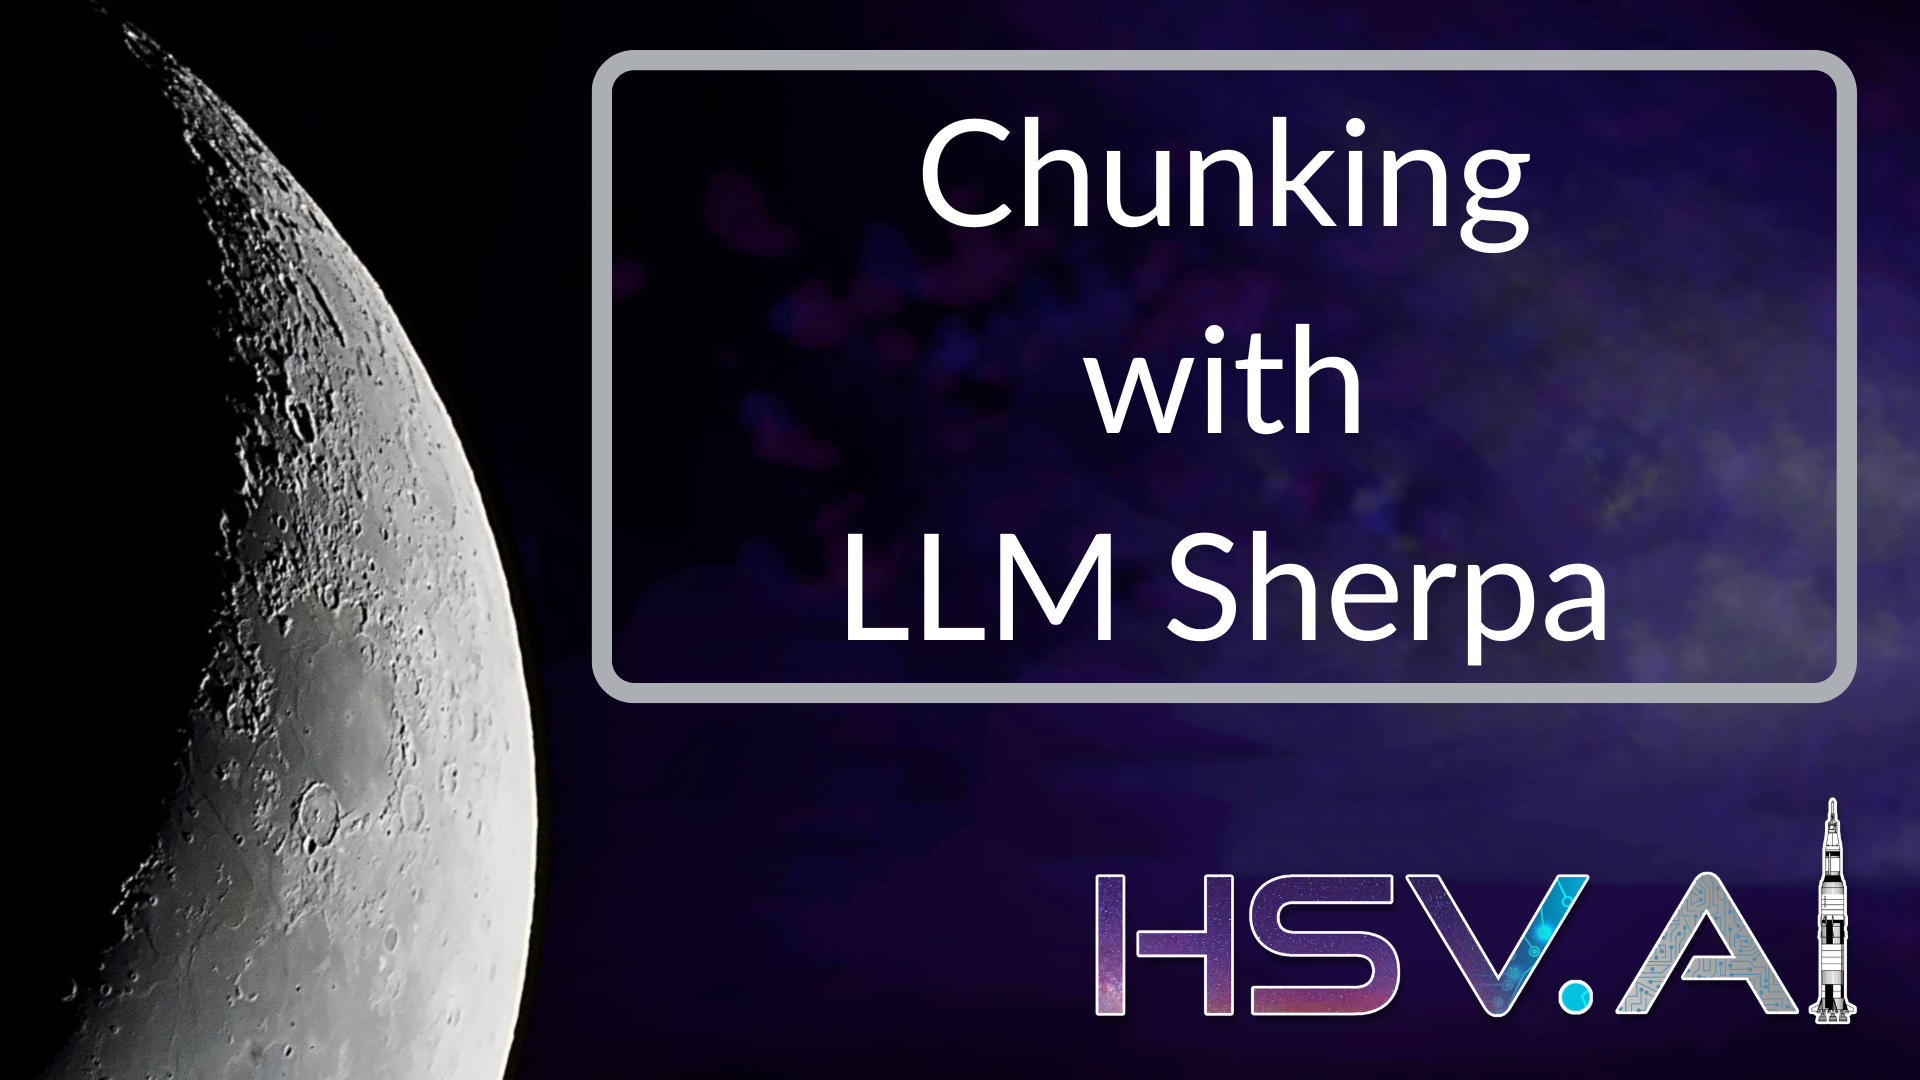 Chunking with LLM Sherpa